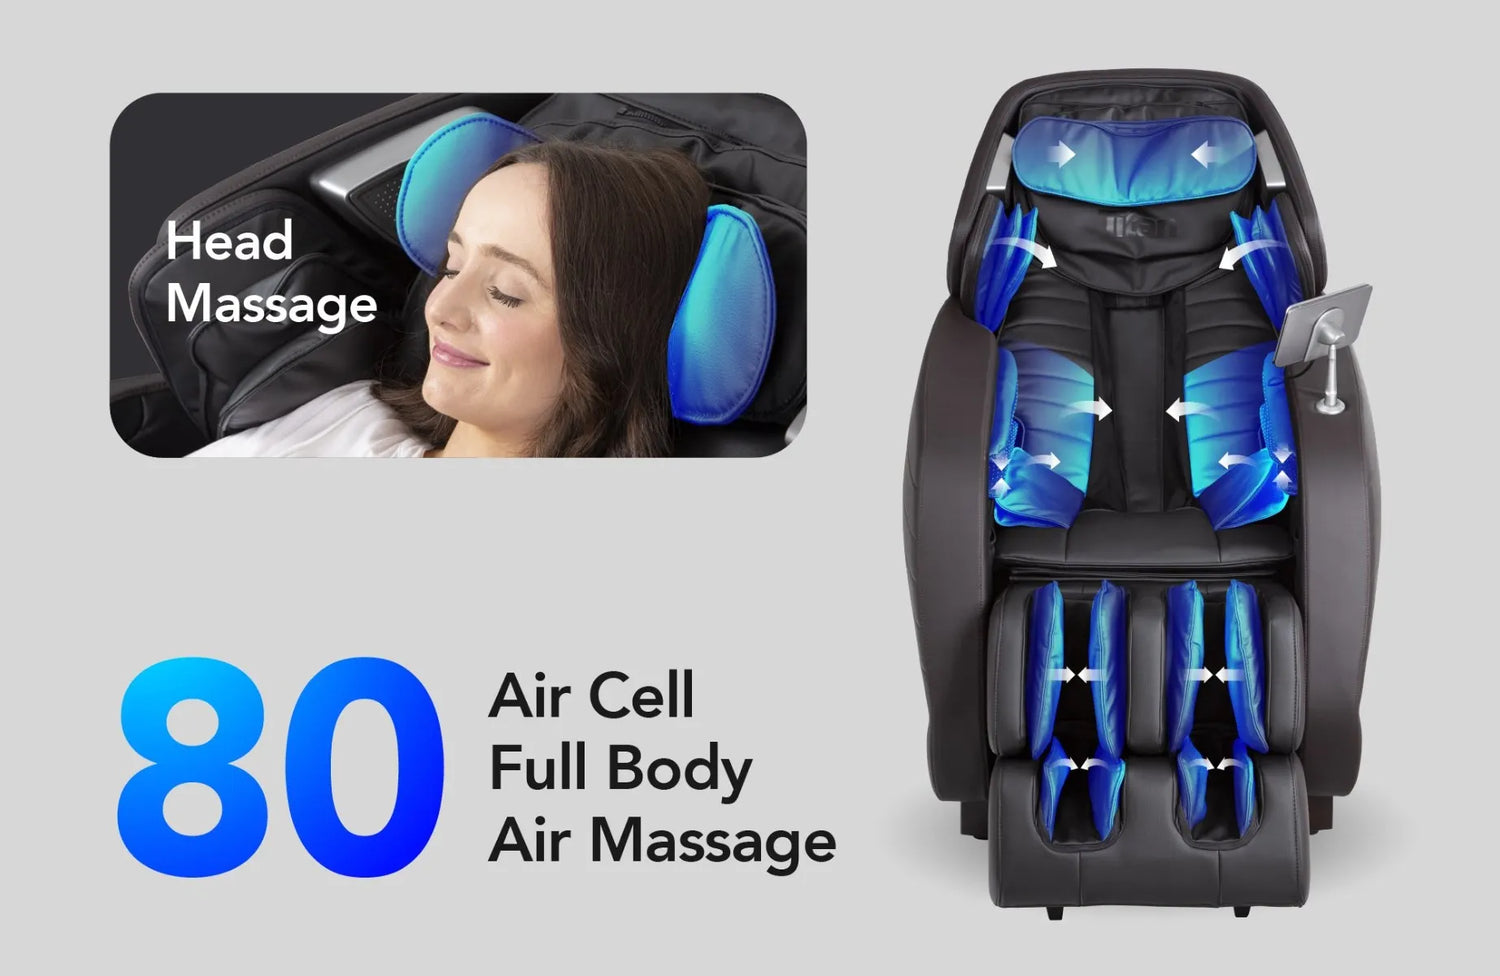 The Titan Jupiter Premium LE Massage Chair incorporates 80 airbags so that you can experience a full-coverage air massage.